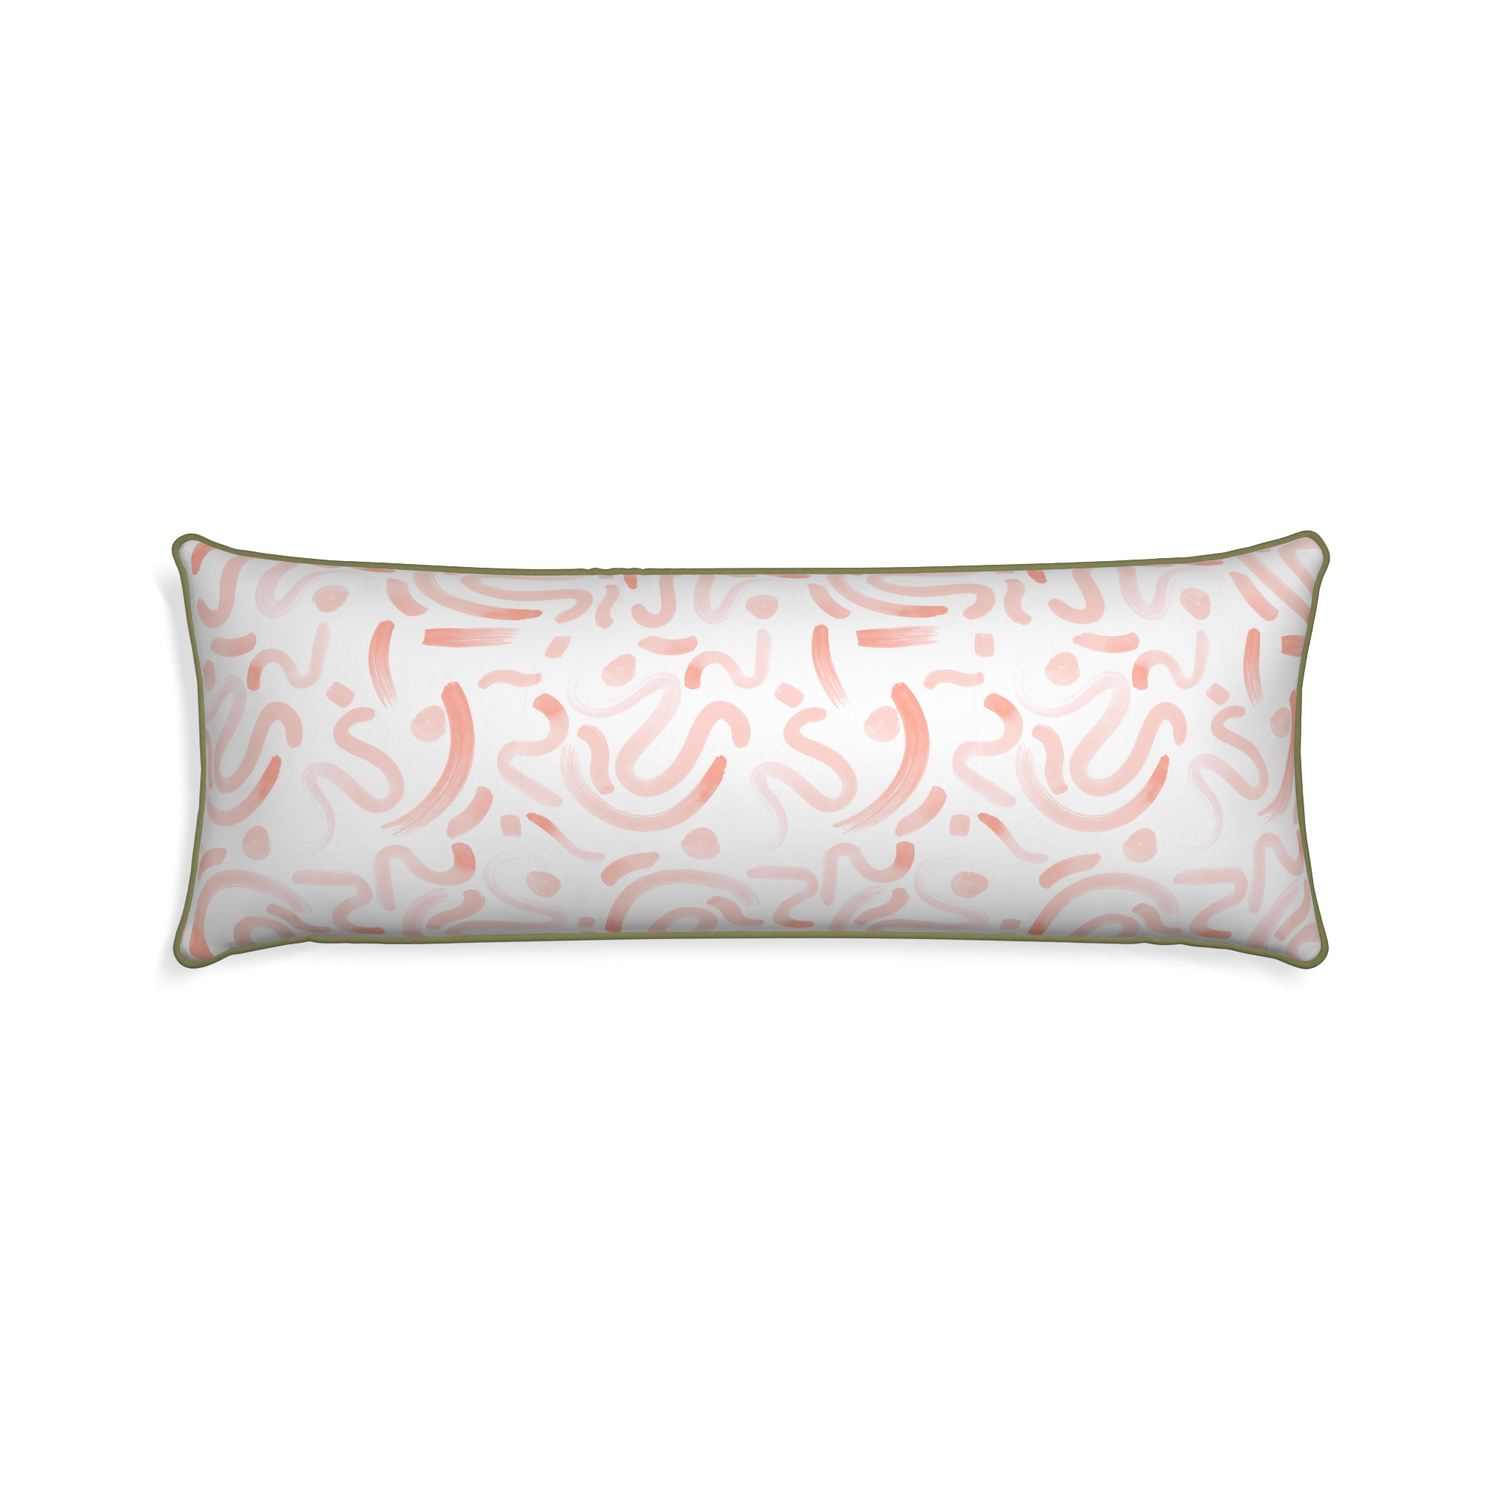 Xl-lumbar hockney pink custom pillow with moss piping on white background